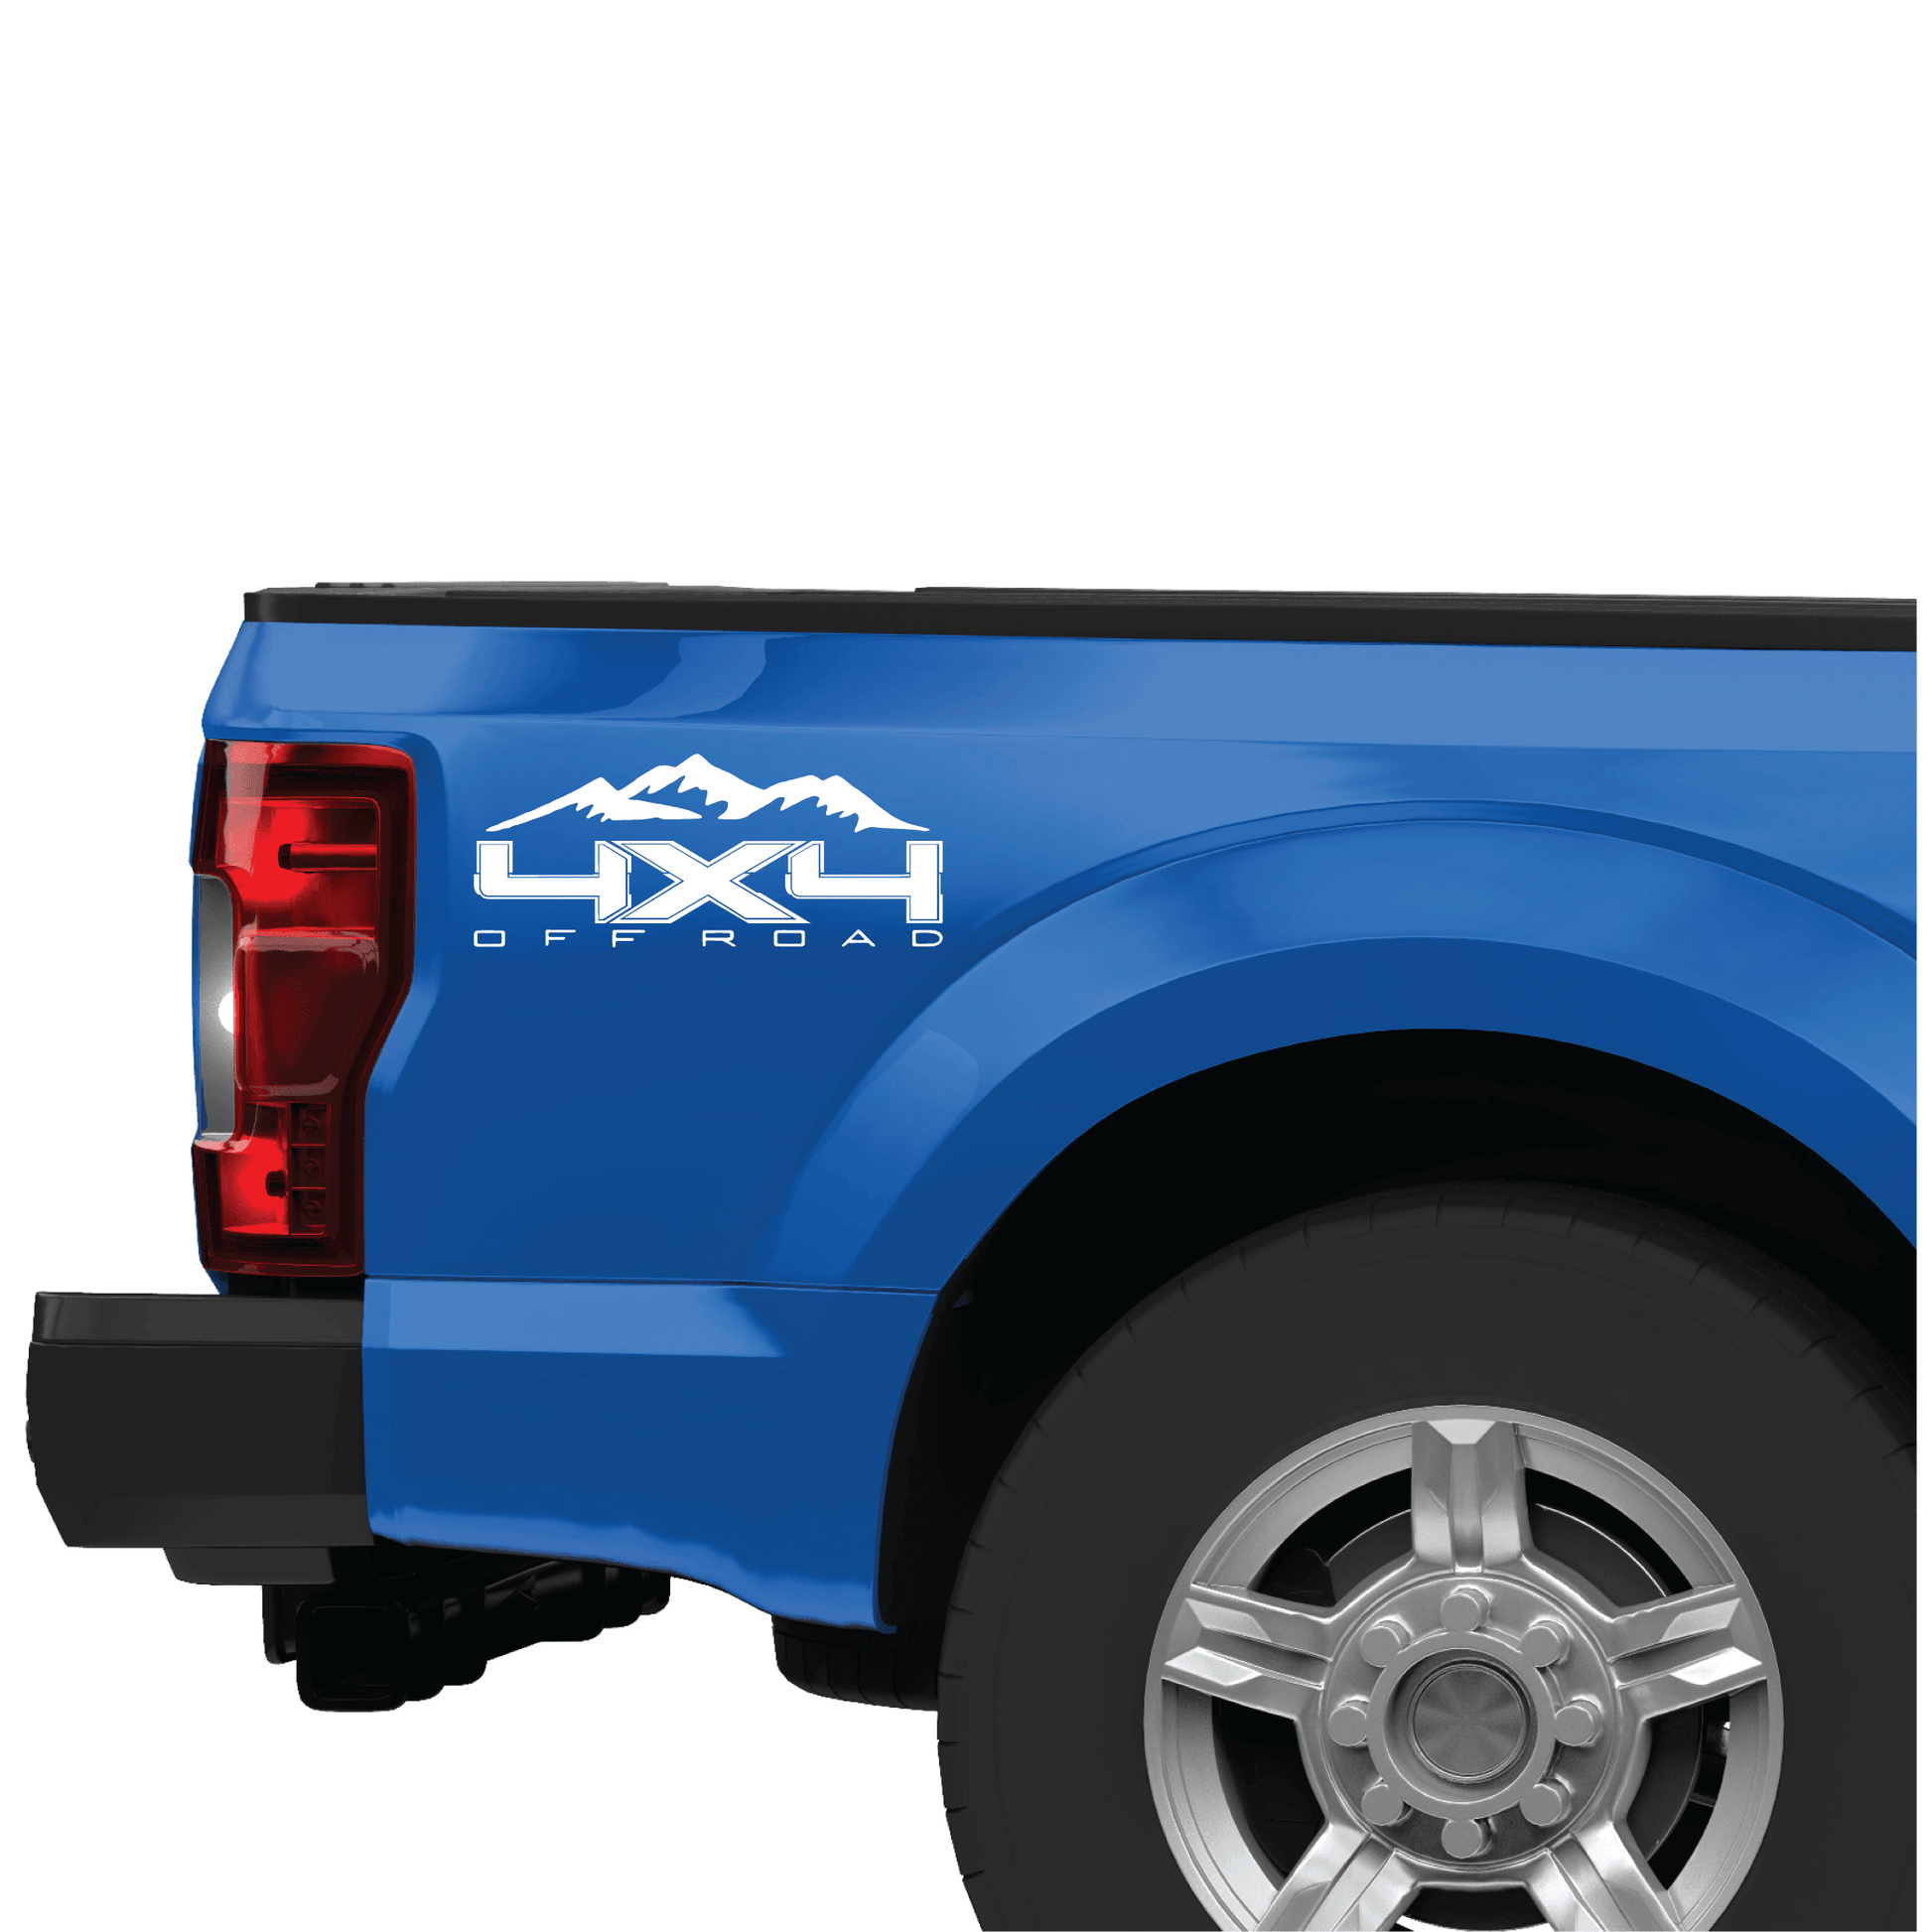 Shop Vinyl Design F-150 F-250 Trucks Replacement Bedside Decals Mountain 4 x 4 Off Road #09 Vehicle decal 001 White Gloss Shop Vinyl Design decals stickers